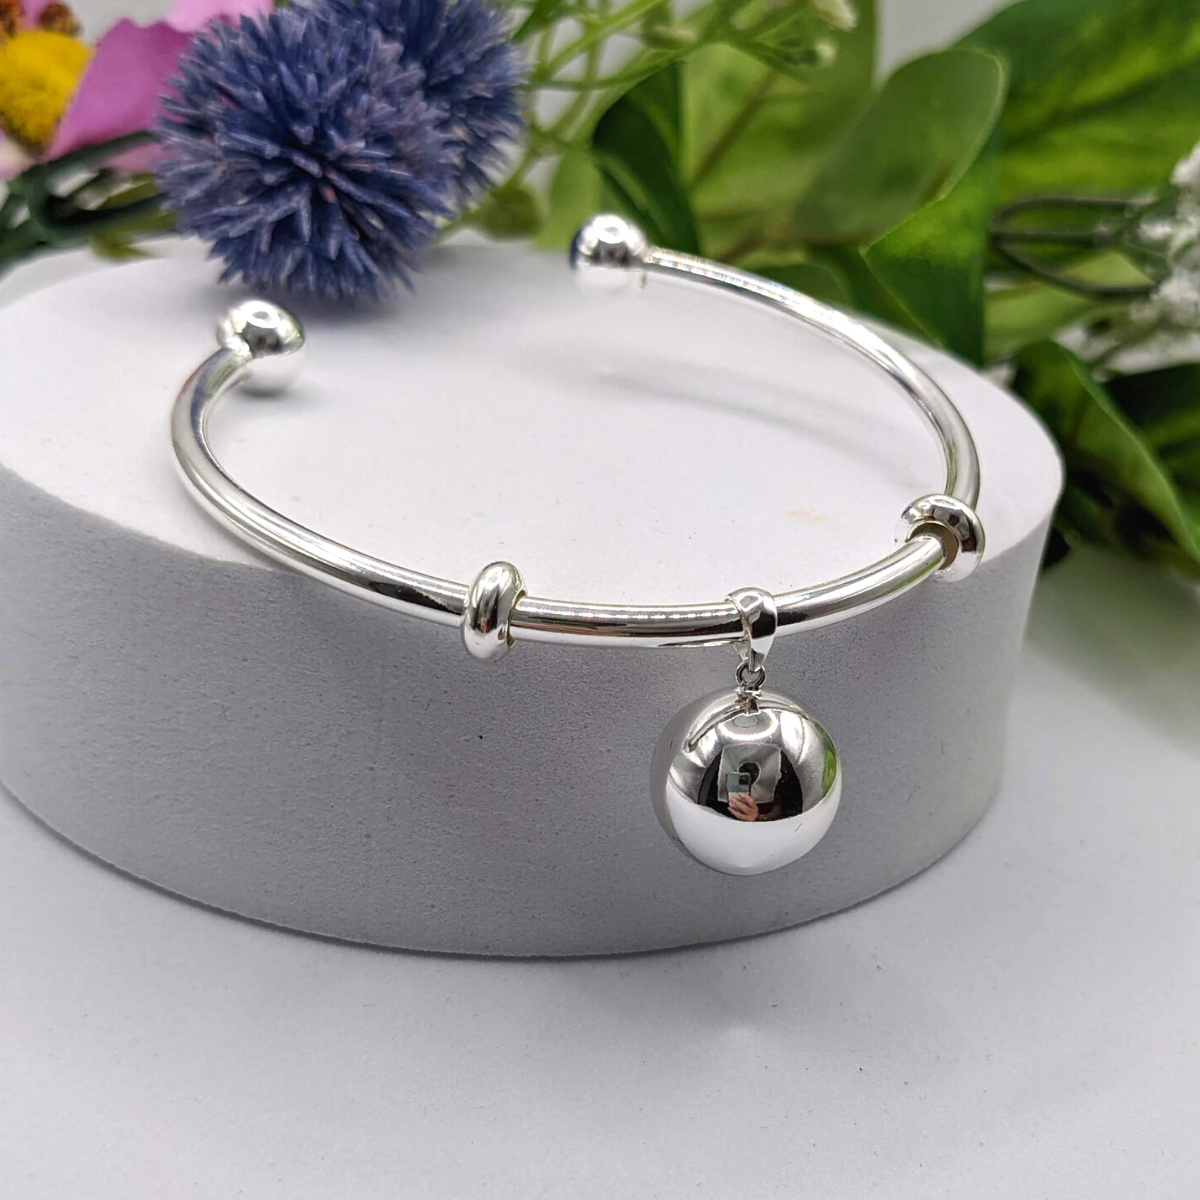 14mm Harmony Ball Bangle Bracelet in Silver - Nature Reflections